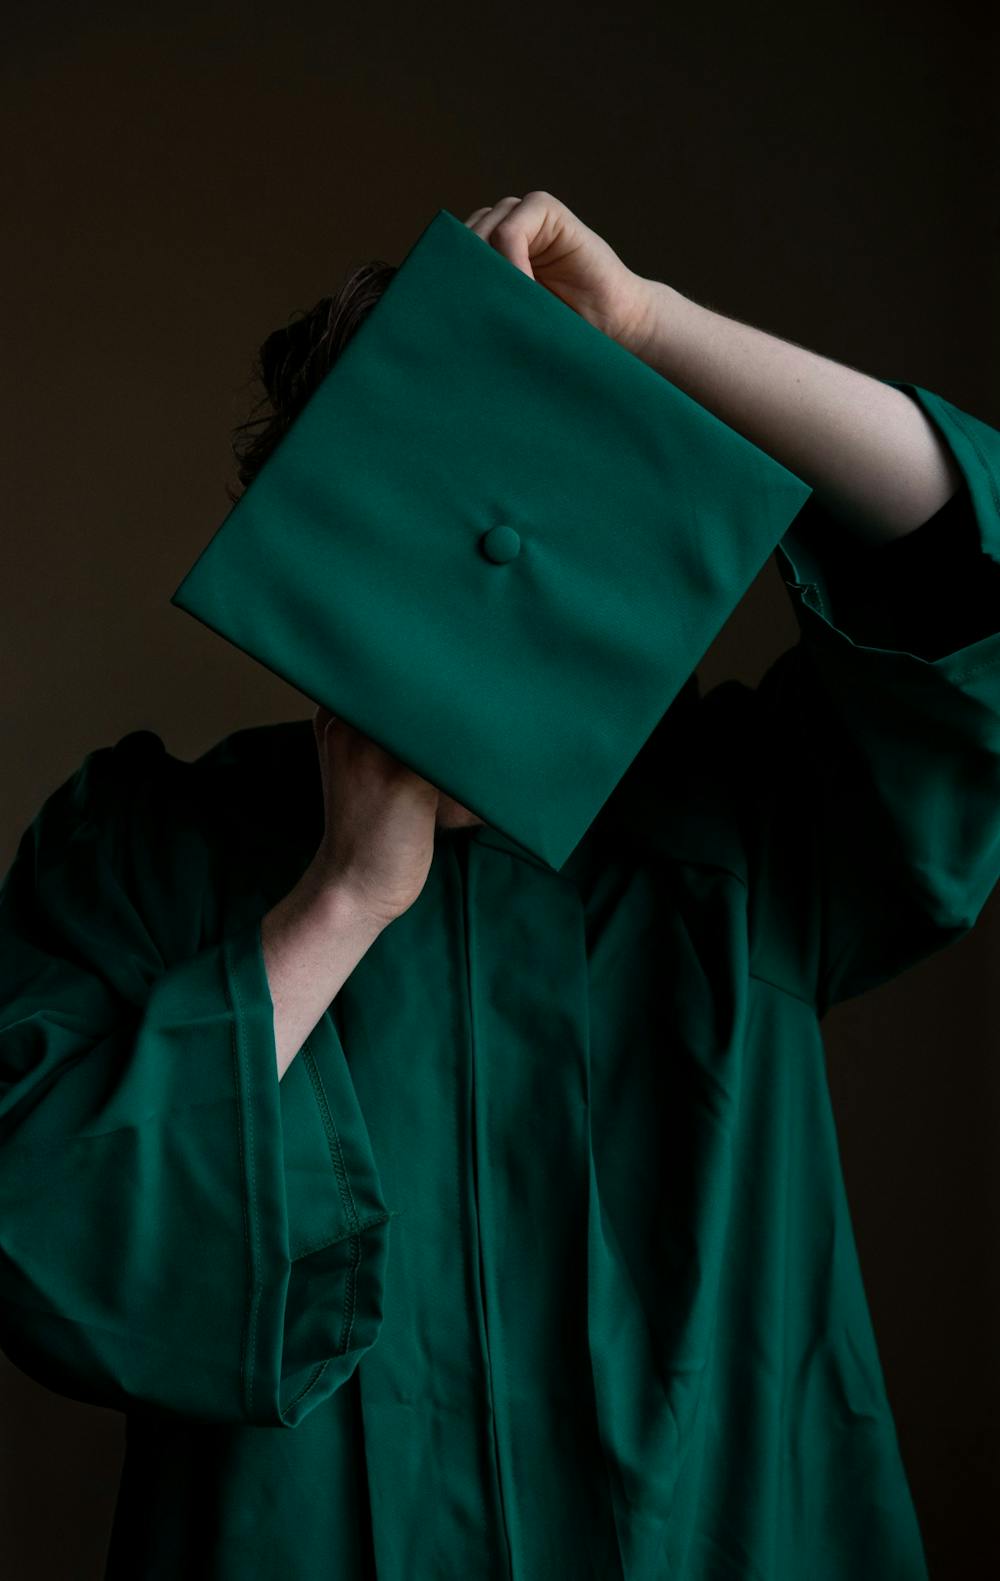 A graduation cap and gown photographed on April 22, 2020.